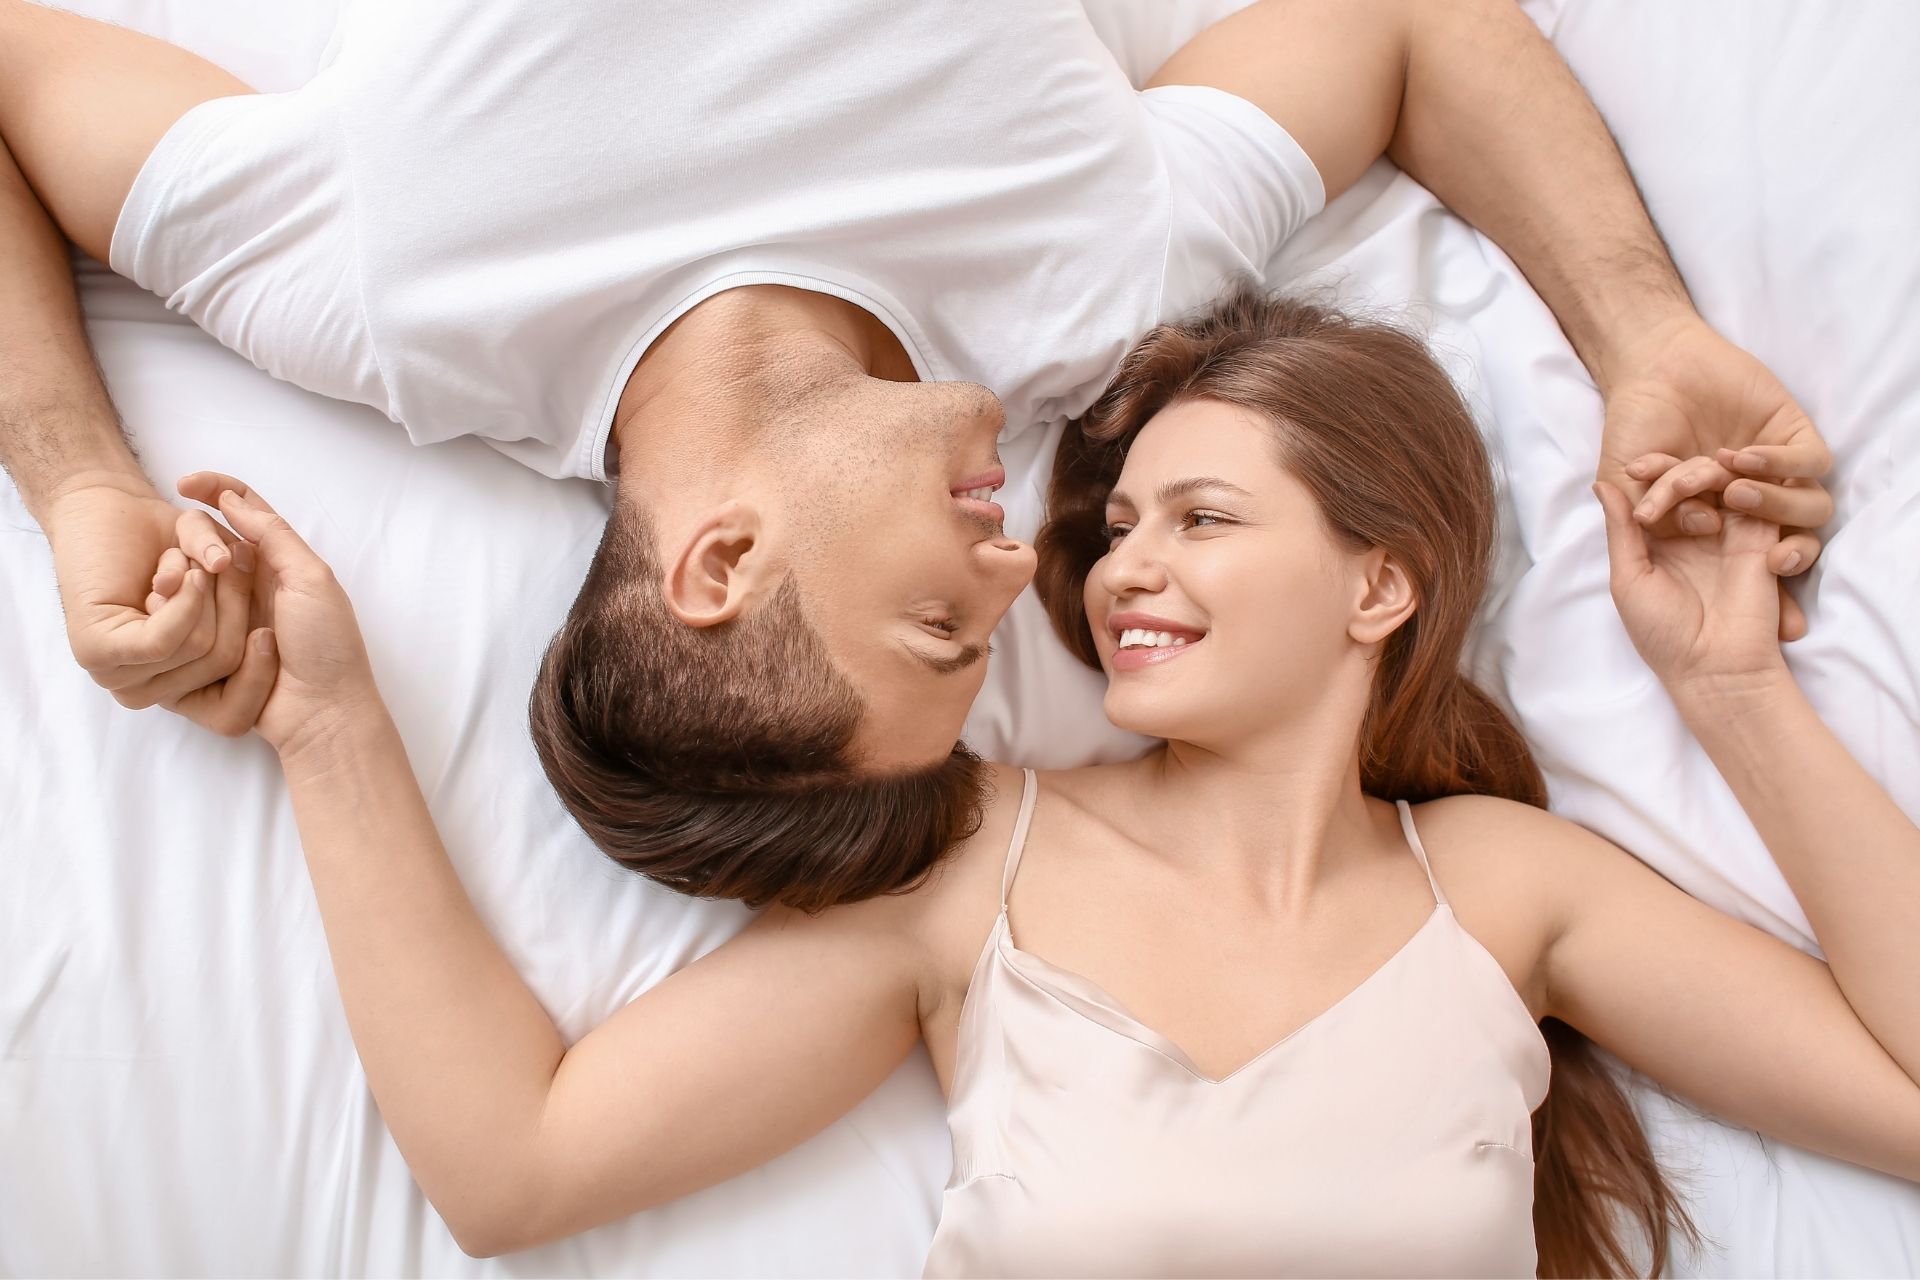 Things to make your man happy in bed